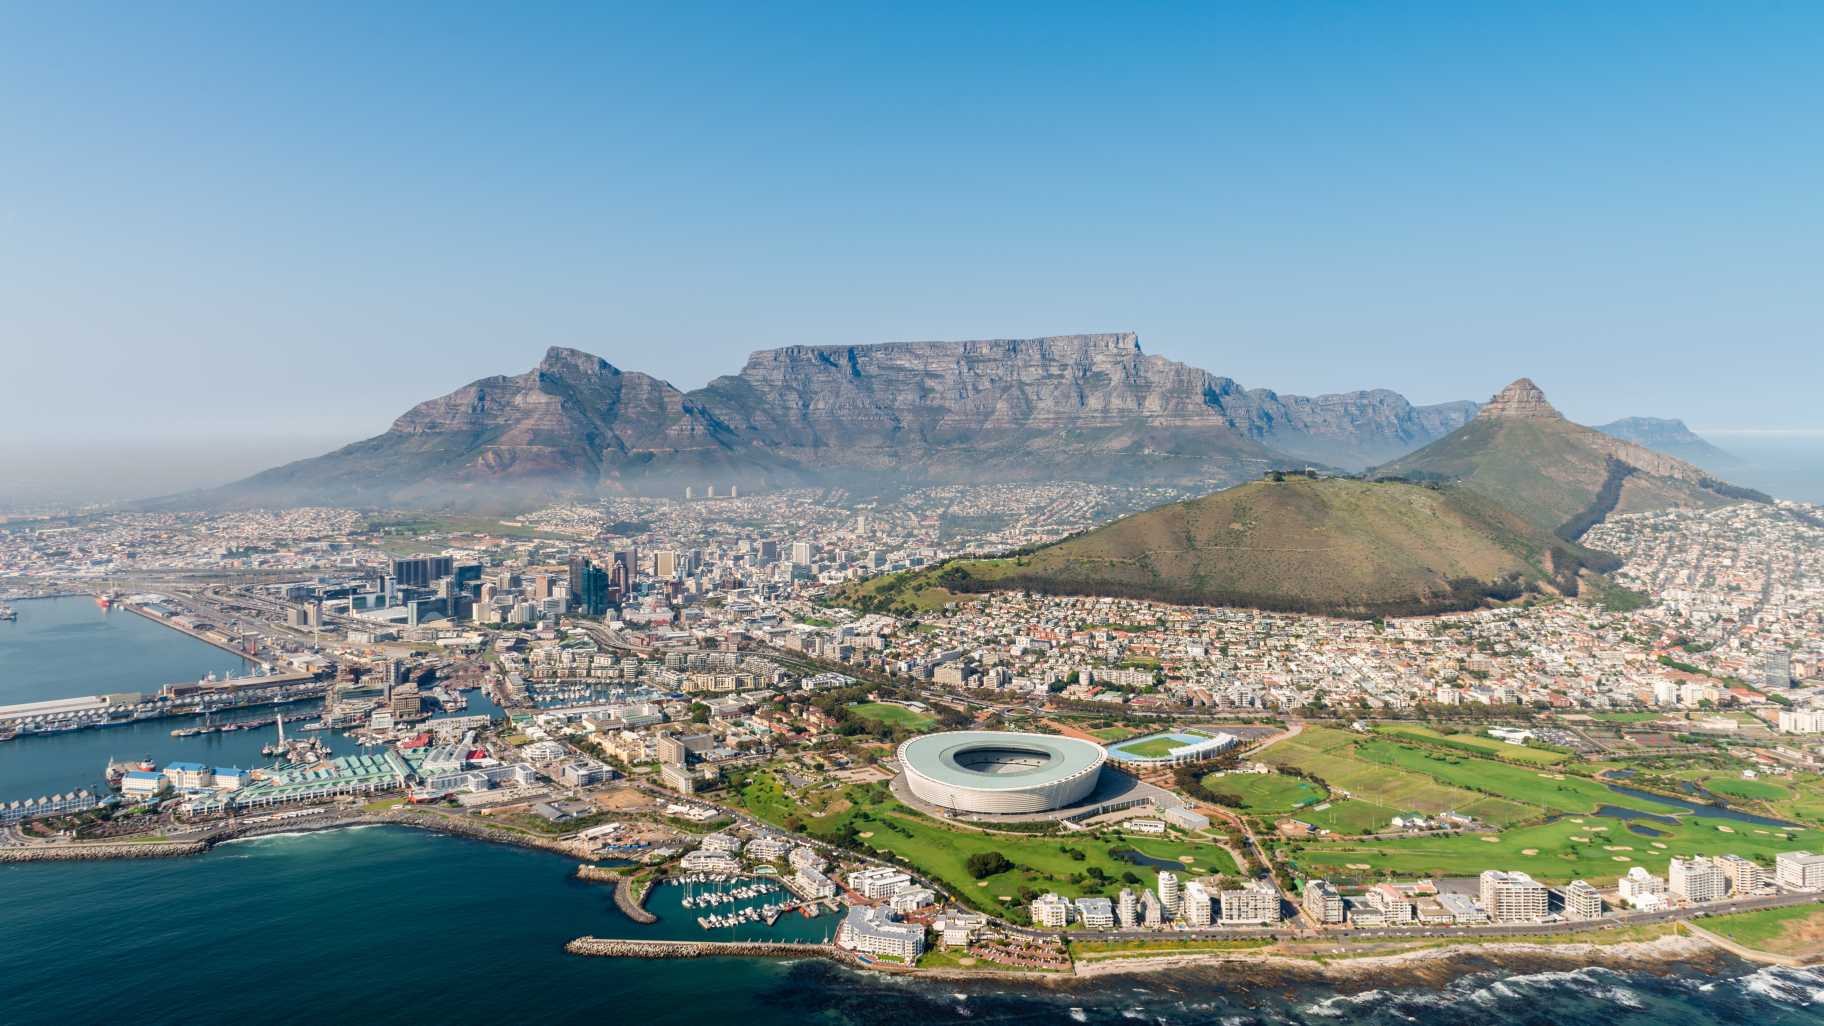 Discover the beautiful city of Cape Town, pictured here from above, on a cape town vacation